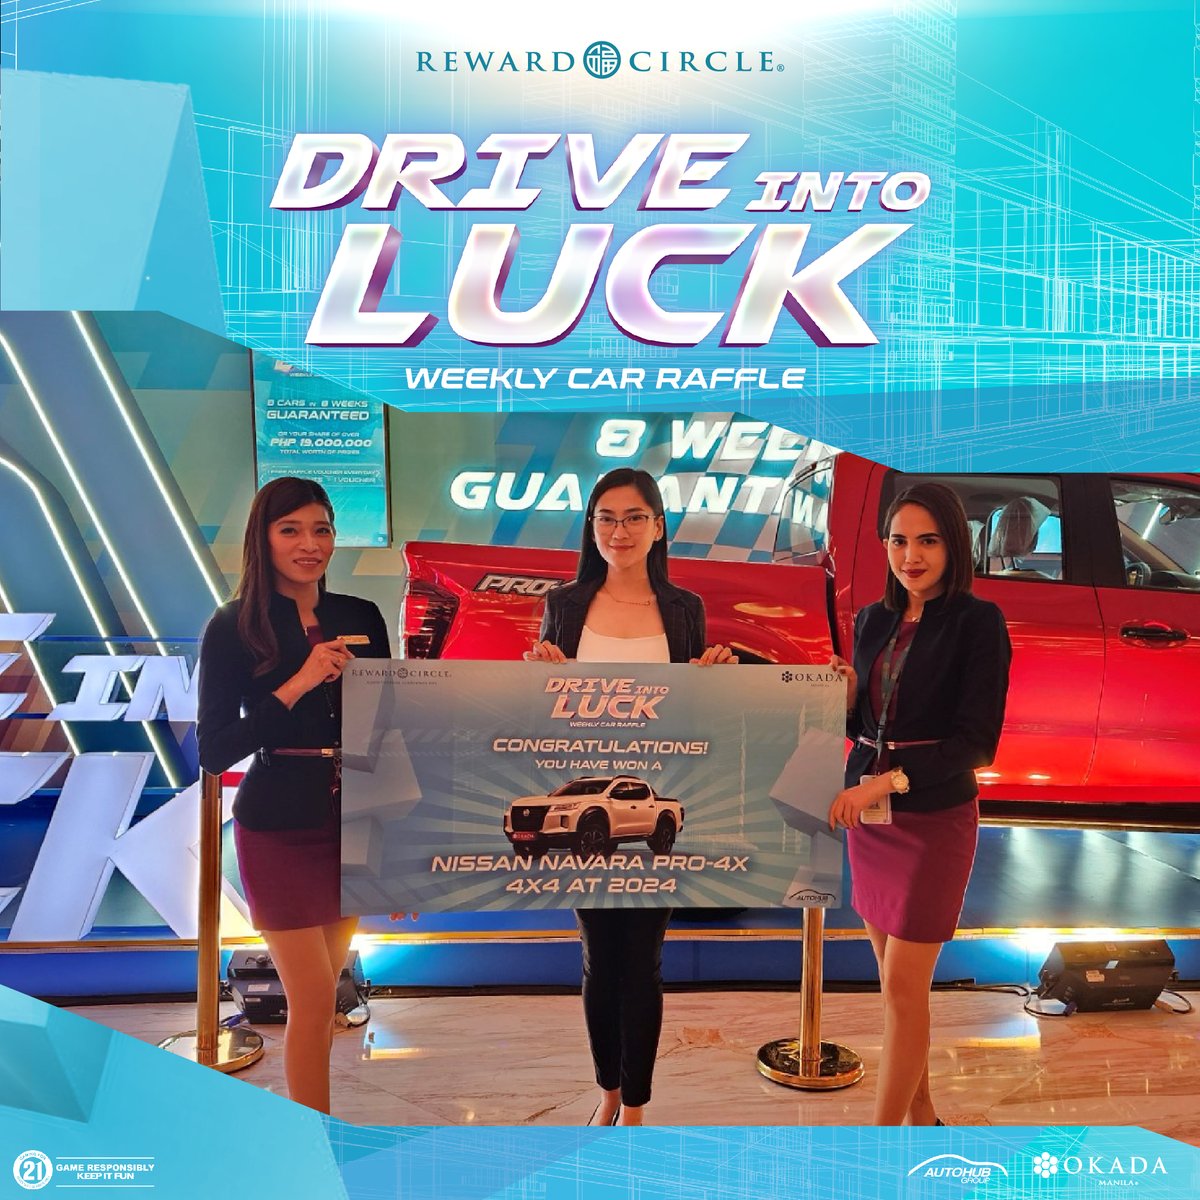 Congratulations to the eighth and final winner of Drive Into Luck: Weekly Car Raffle! Big thanks to everyone who joined this promotion. Keep your eyes peeled for more updates about Okada Manila’s upcoming offers.